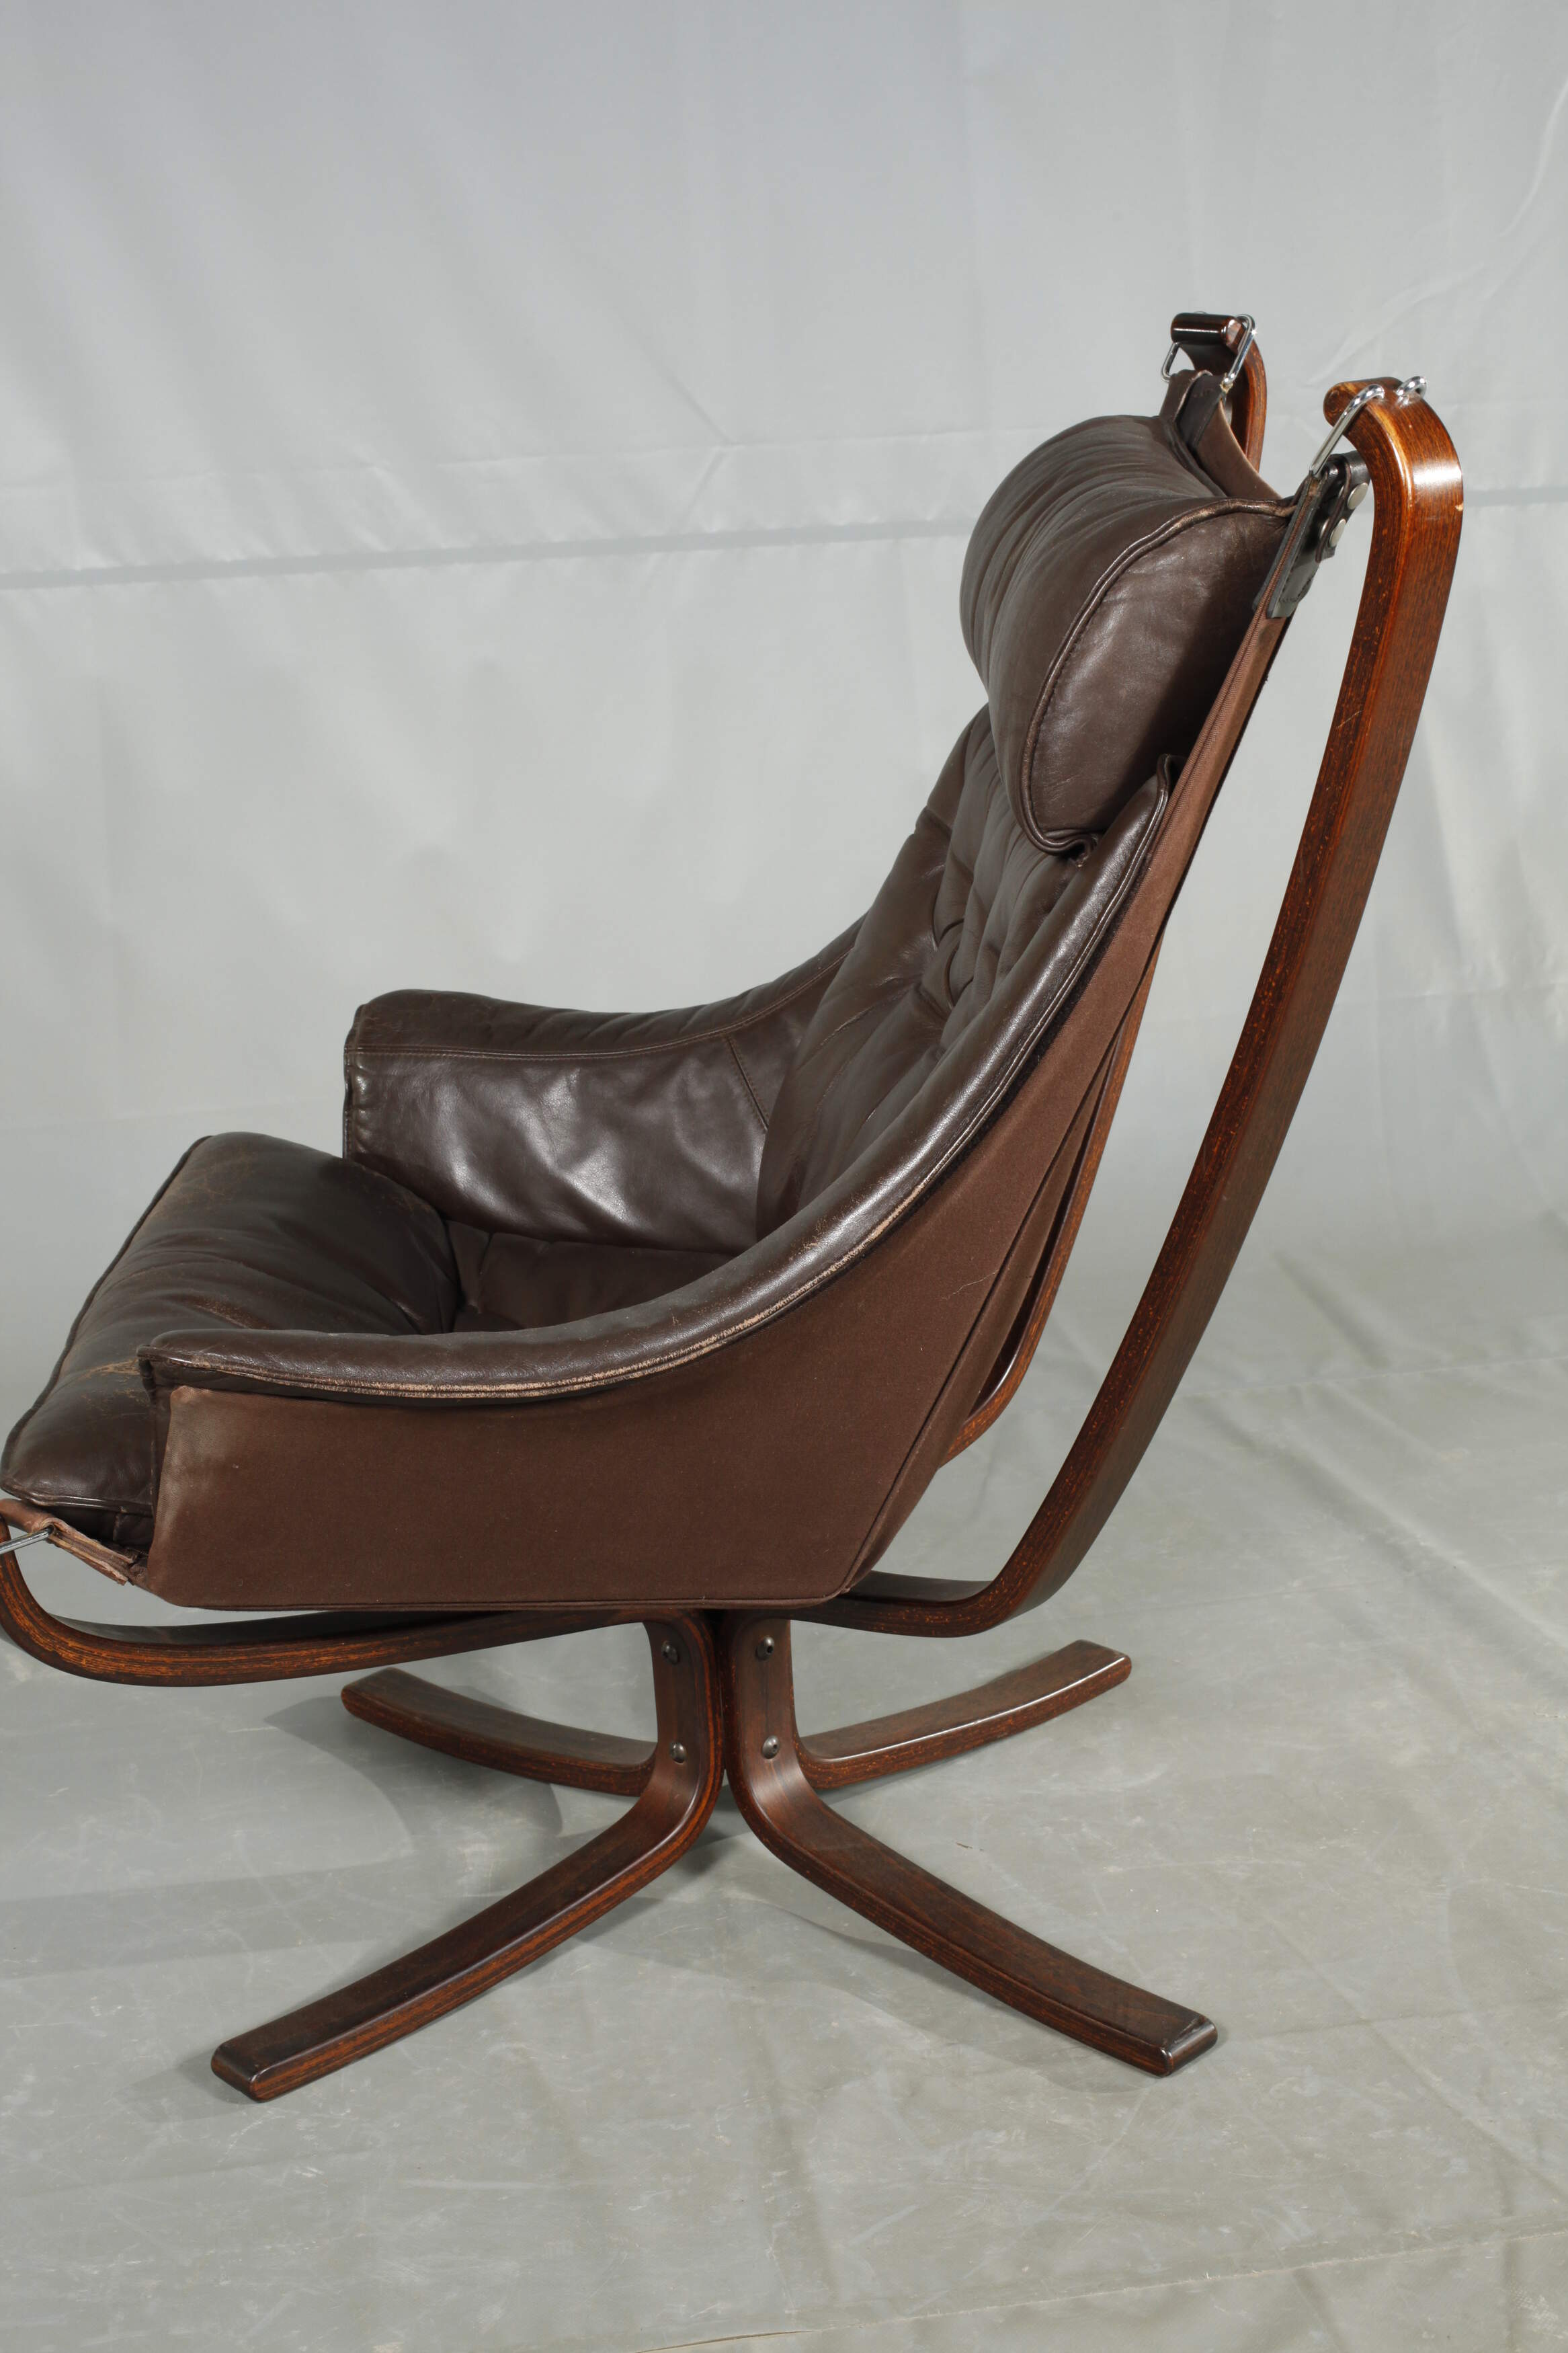 "Falcon Chair" with ottoman - Image 6 of 9